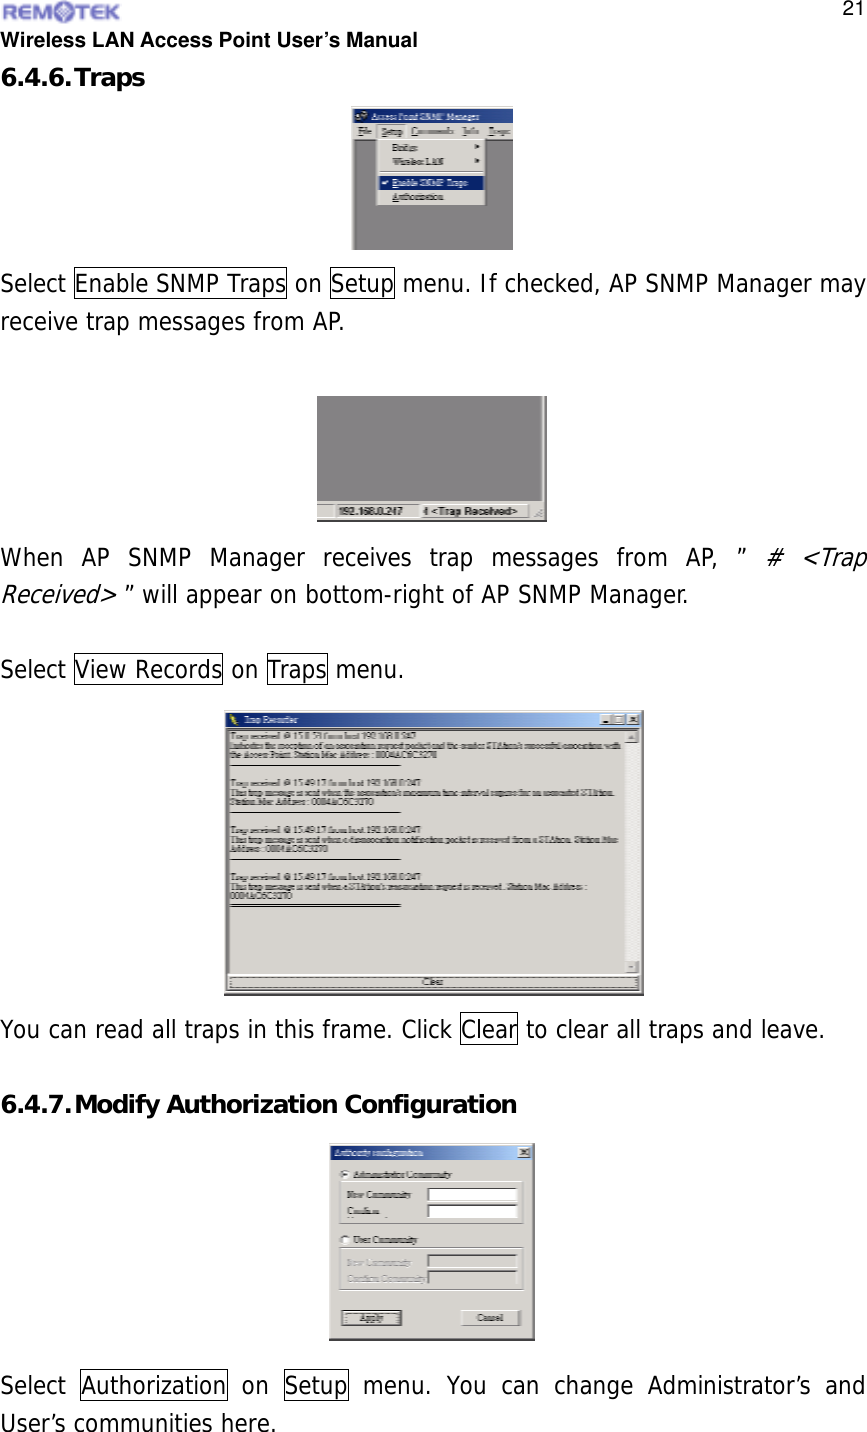  Wireless LAN Access Point User’s Manual  216.4.6. Traps Select Enable SNMP Traps on Setup menu. If checked, AP SNMP Manager may receive trap messages from AP.  When AP SNMP Manager receives trap messages from AP, ” # &lt;Trap Received&gt; ” will appear on bottom-right of AP SNMP Manager.  Select View Records on Traps menu. You can read all traps in this frame. Click Clear to clear all traps and leave.   6.4.7. Modify Authorization Configuration Select Authorization on Setup menu. You can change Administrator’s and User’s communities here.       